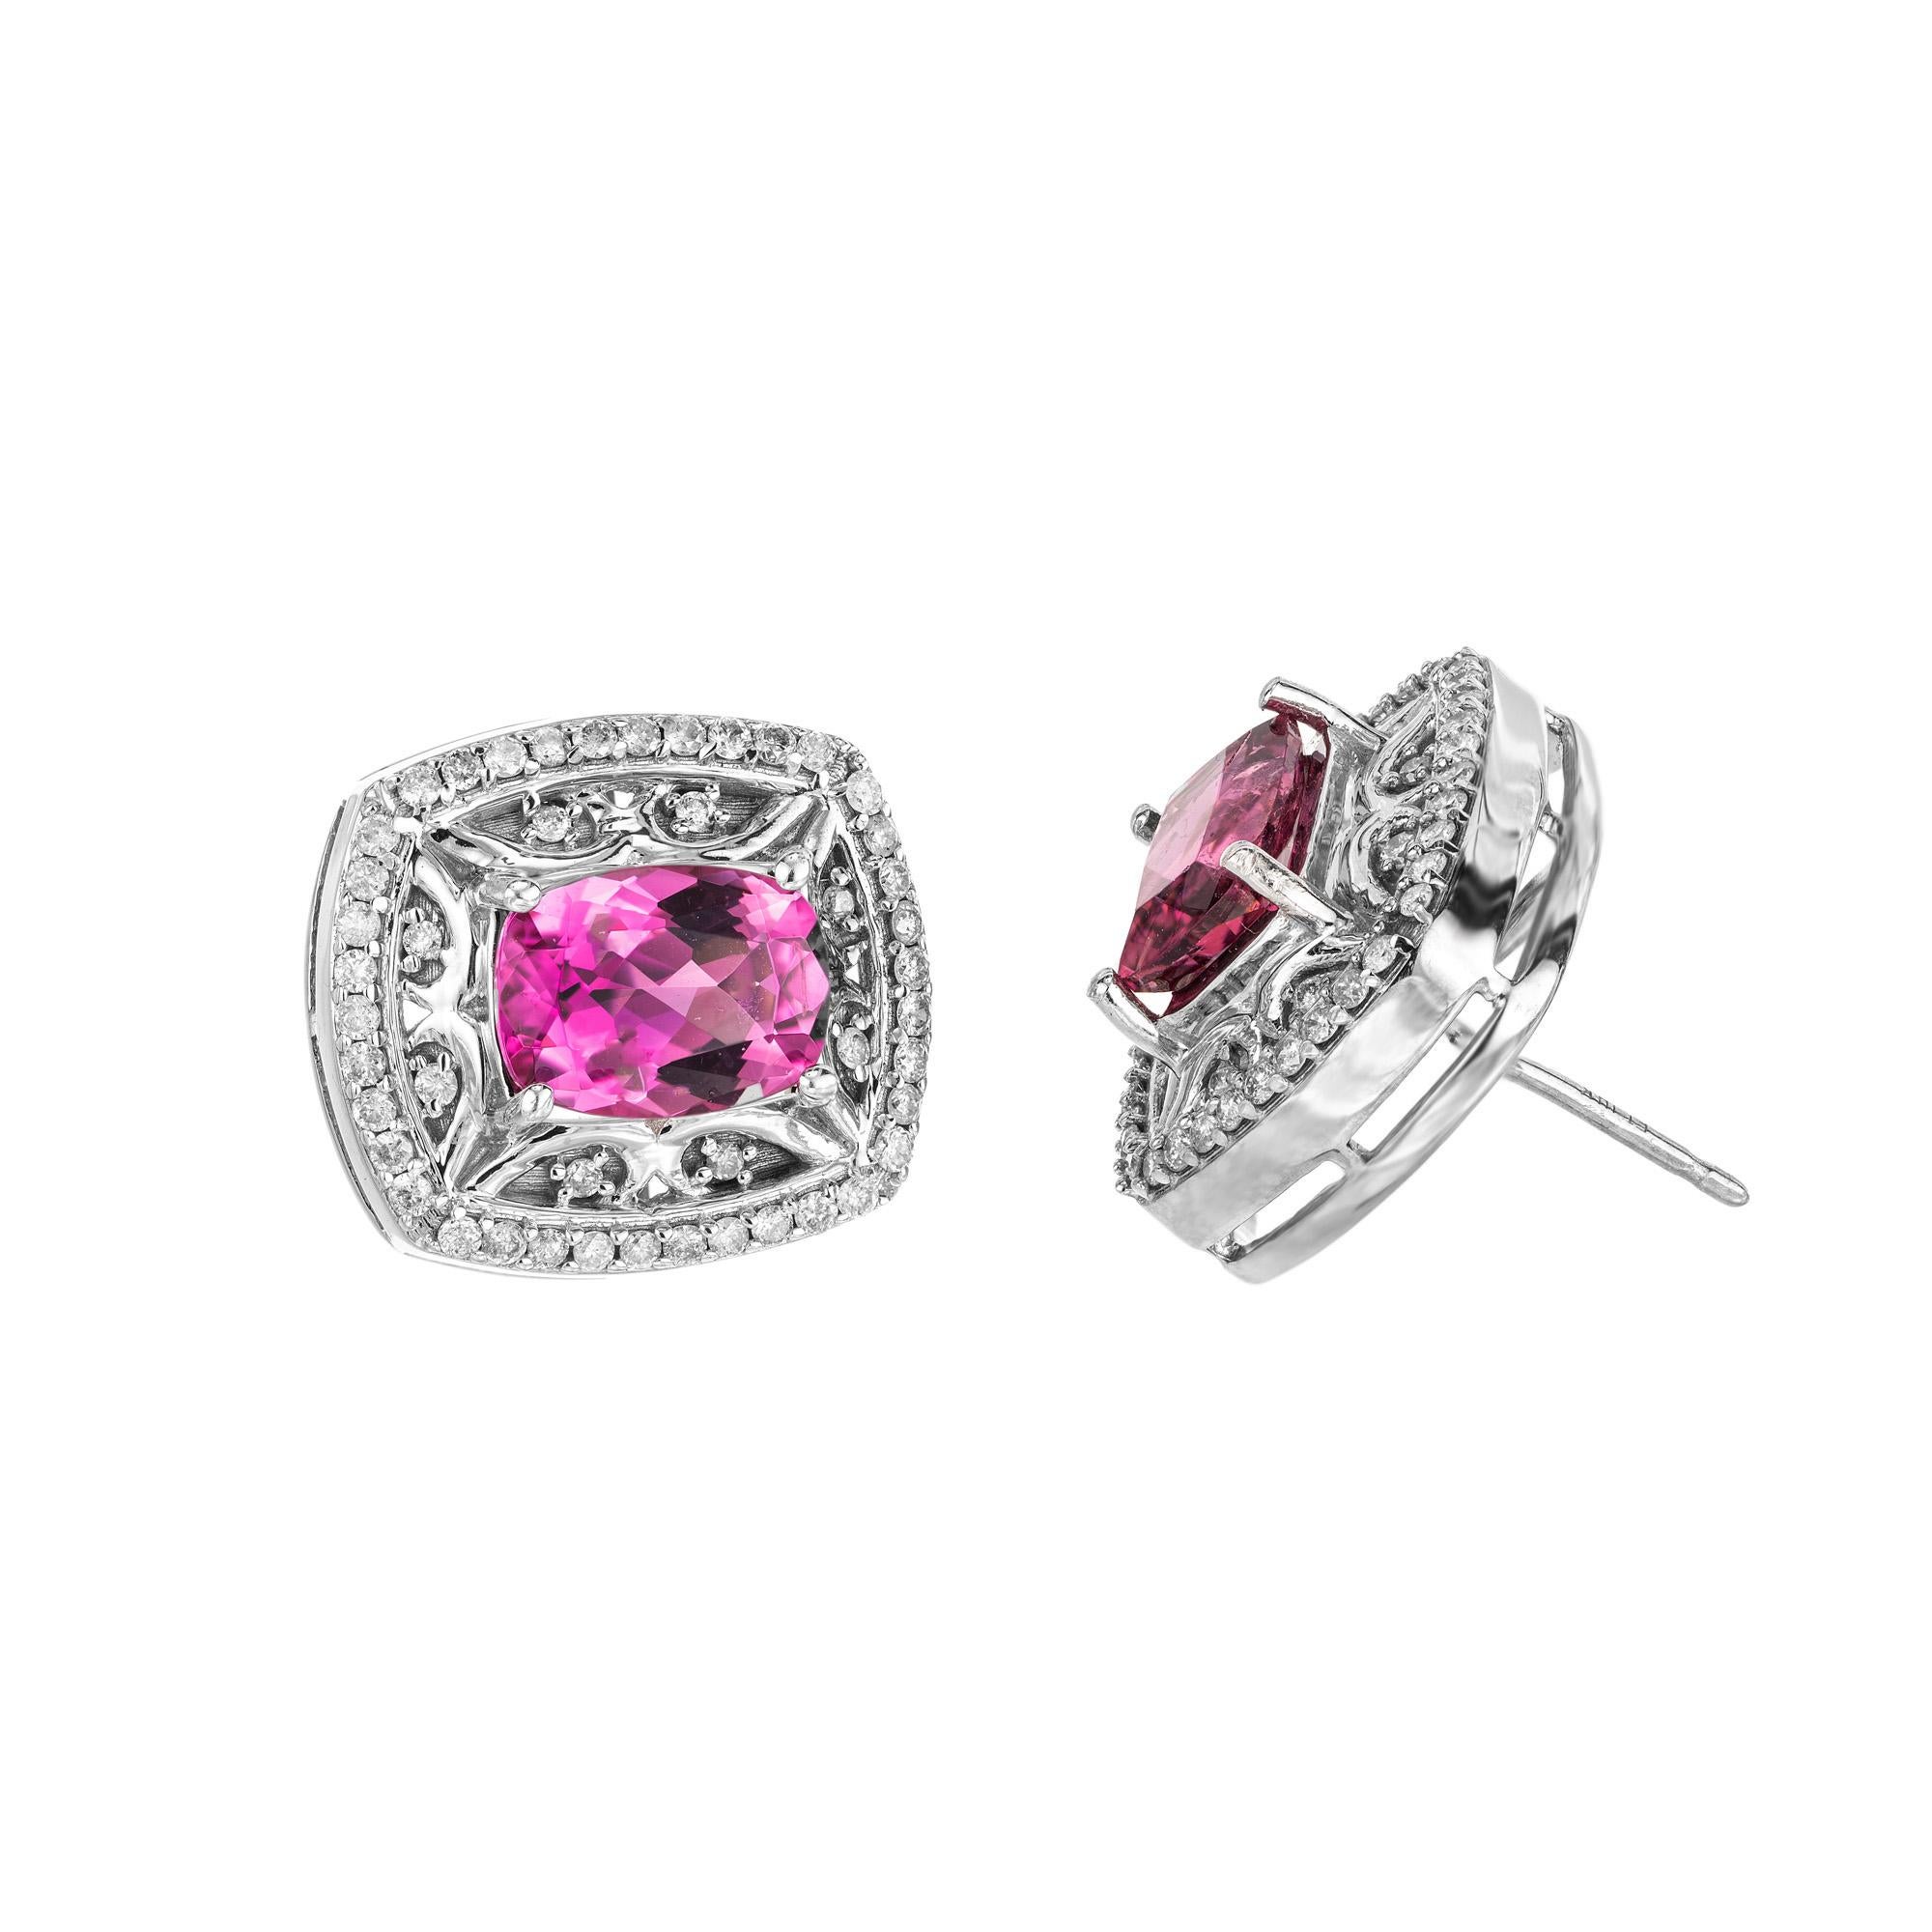 2.40 Carat Oval Pink Tourmaline Diamond Halo White Gold Earrings In Excellent Condition For Sale In Stamford, CT